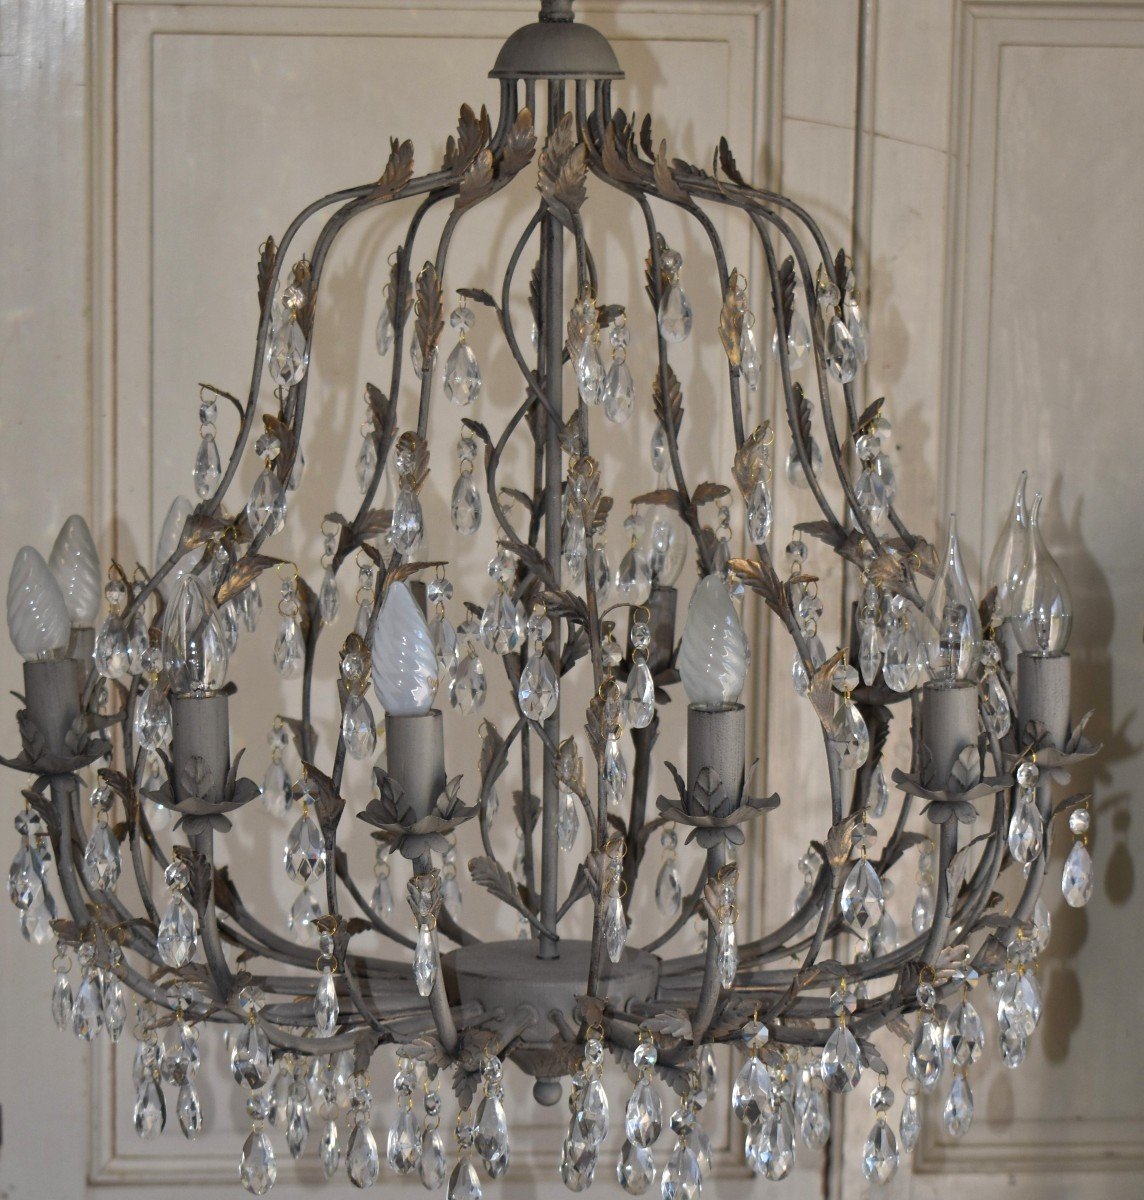 Cage Chandelier With Tassels In The Taste Of Maison Baguès With 12 Arms Of Lights.-photo-4